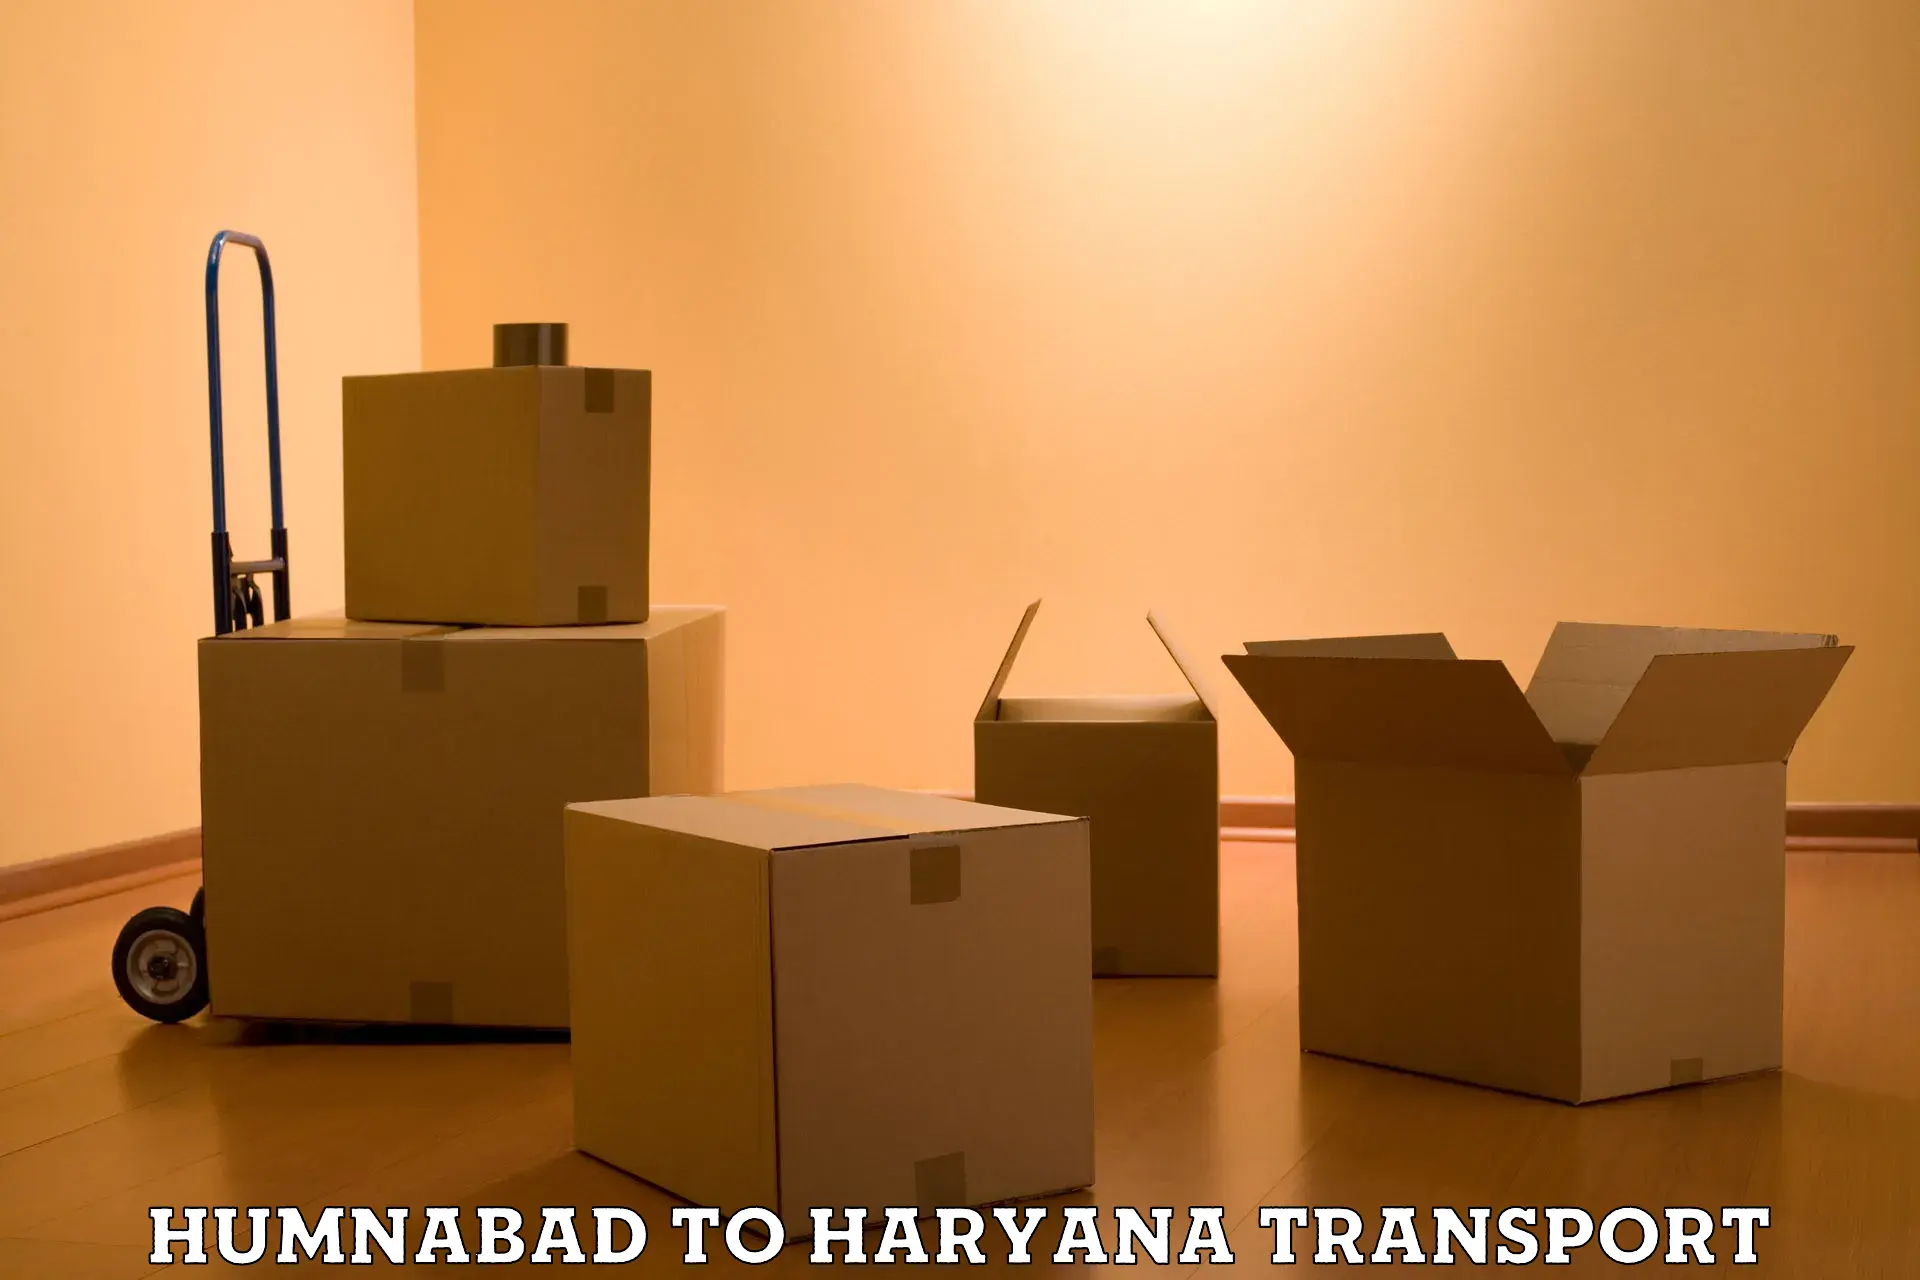 Express transport services in Humnabad to Panchkula